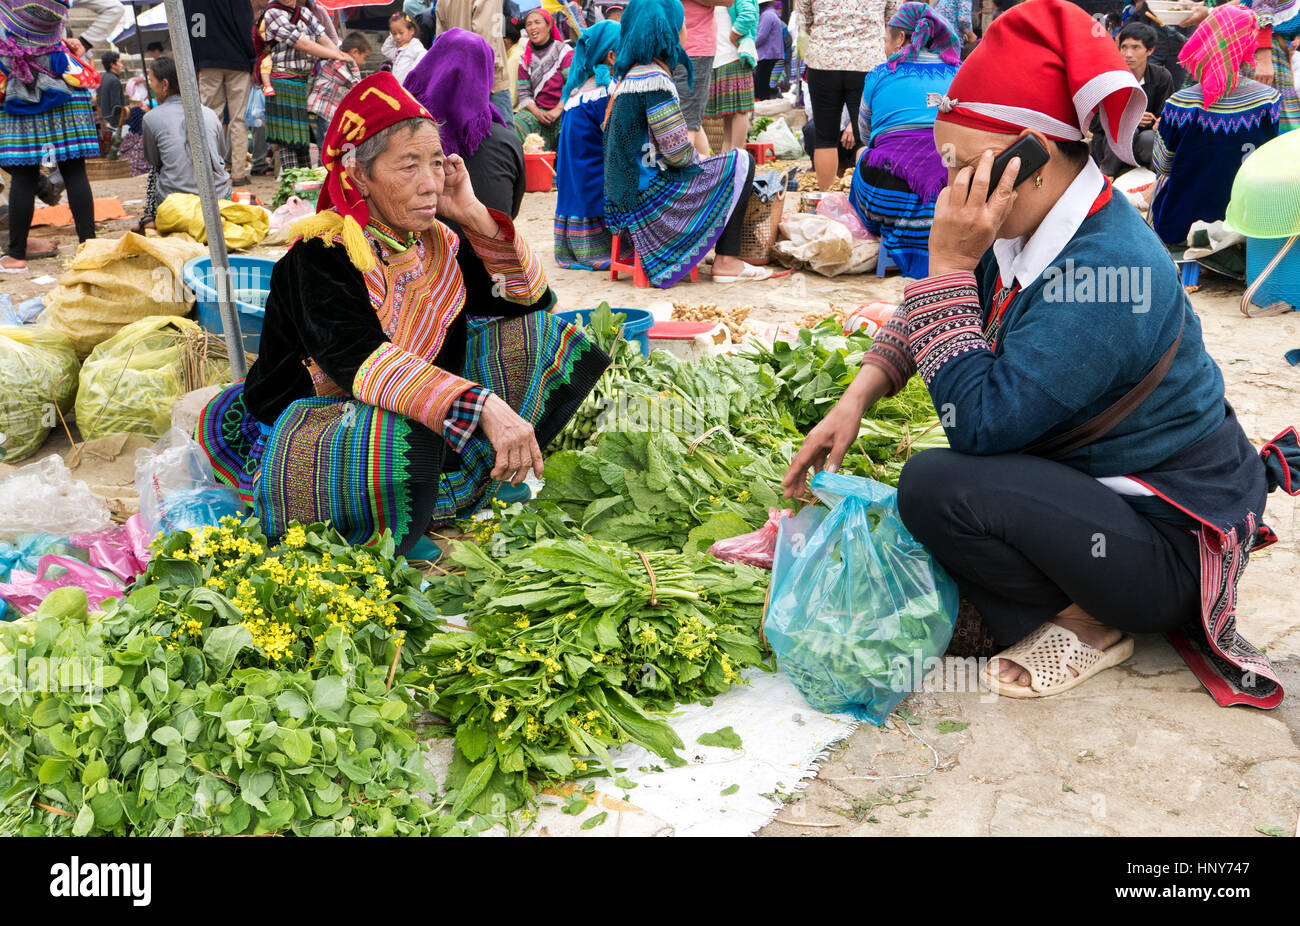 Hmong woman selling her home grown green leafy vegetables,  mefarmers market, customer using her cell phone,  native costumes,  Bac Ha Farmers Market. Stock Photo